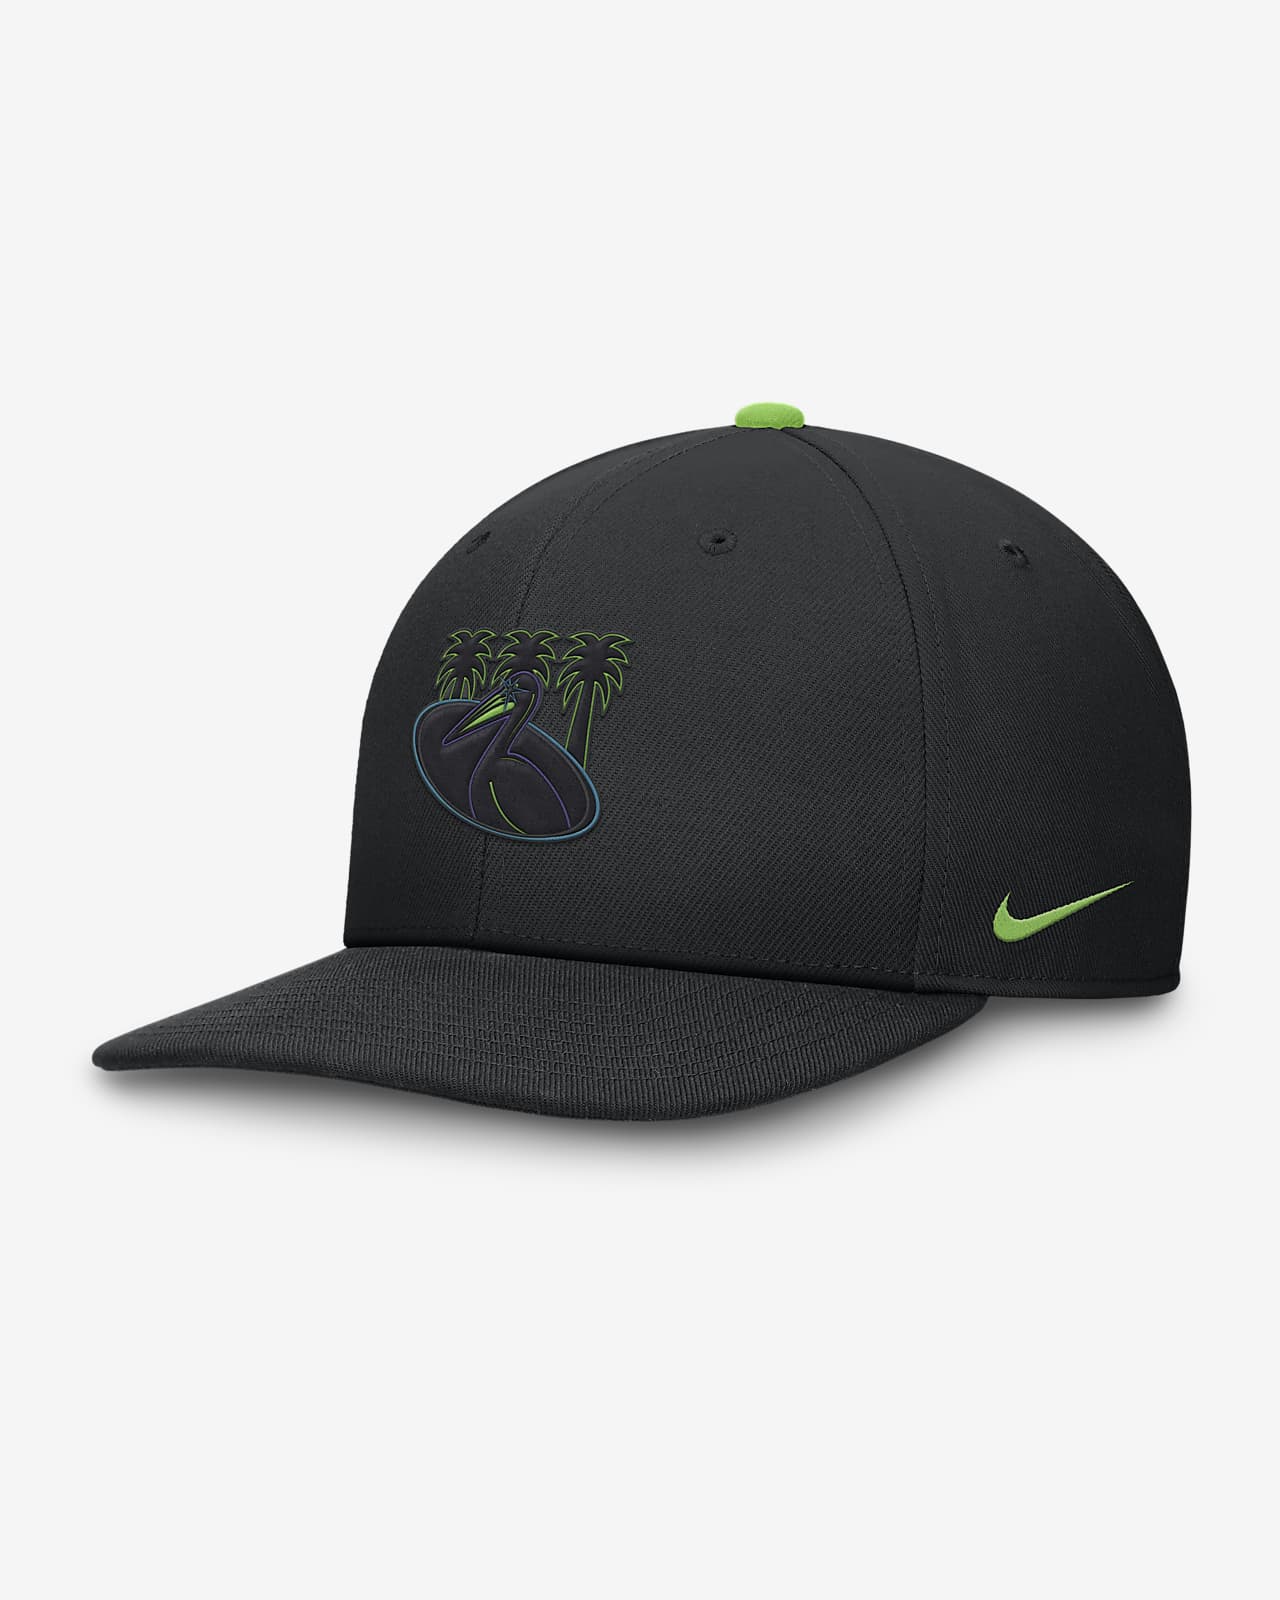 Tampa Bay Rays City Connect Pro Nike Dri-FIT MLB Adjustable Hat